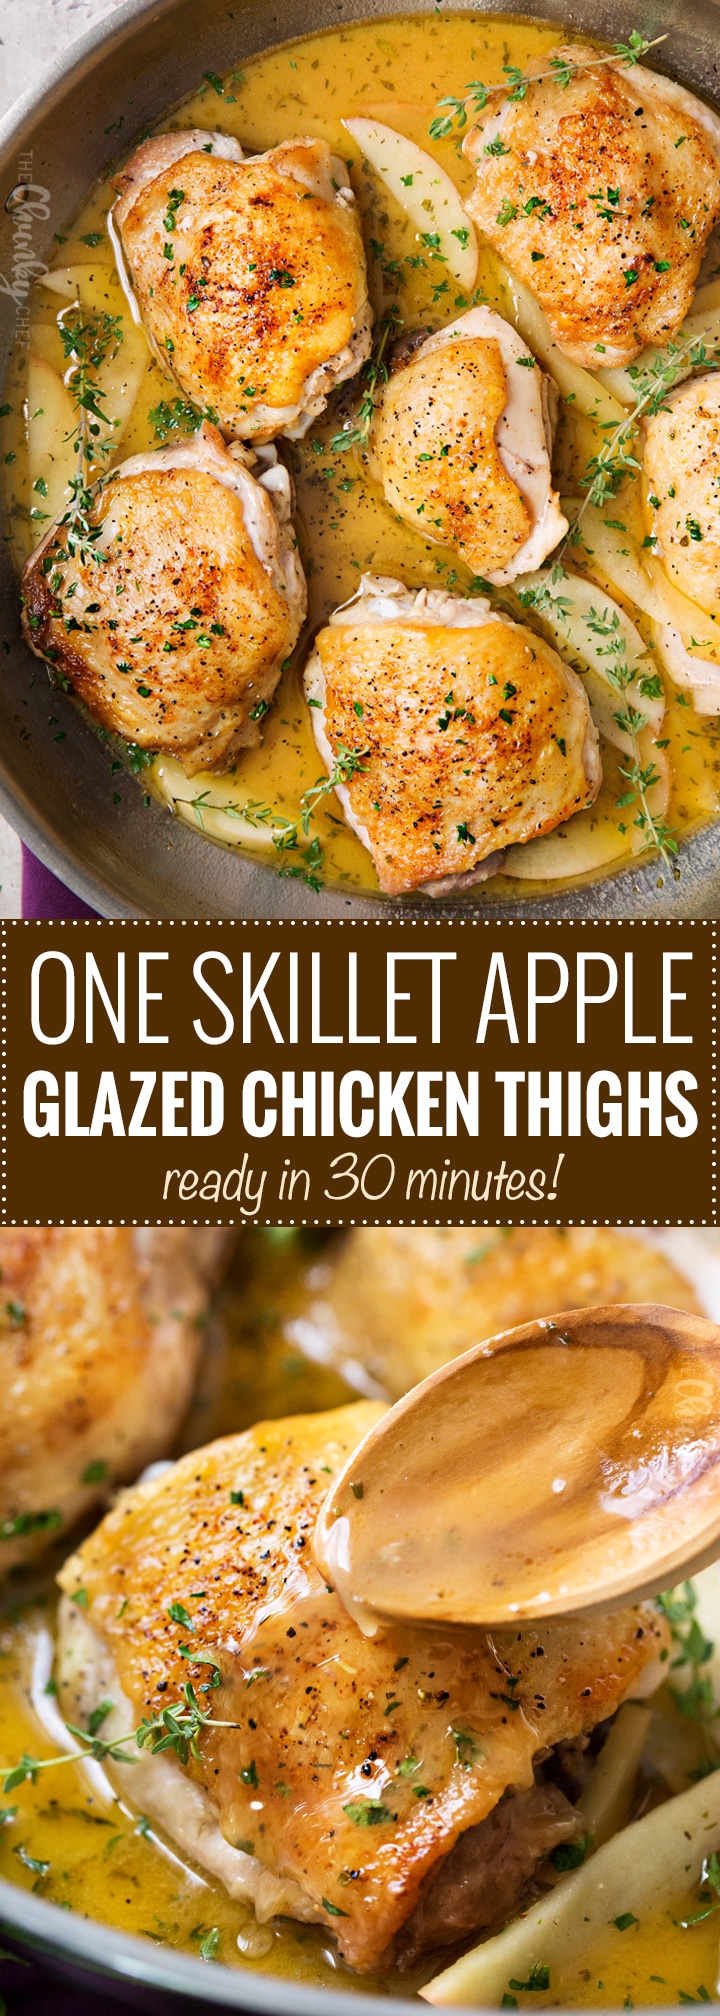 One Pan Apple Glazed Chicken Thighs | Crispy, yet juicy chicken thighs, cooked in a sweet apple and herb sauce, in one pan, and ready in just 30 minutes!  It's the perfect weeknight meal! | https://www.thechunkychef.com | #chickendinner #weeknightmeal #quickmeal #30minutemeal #apples #onepan #onepot